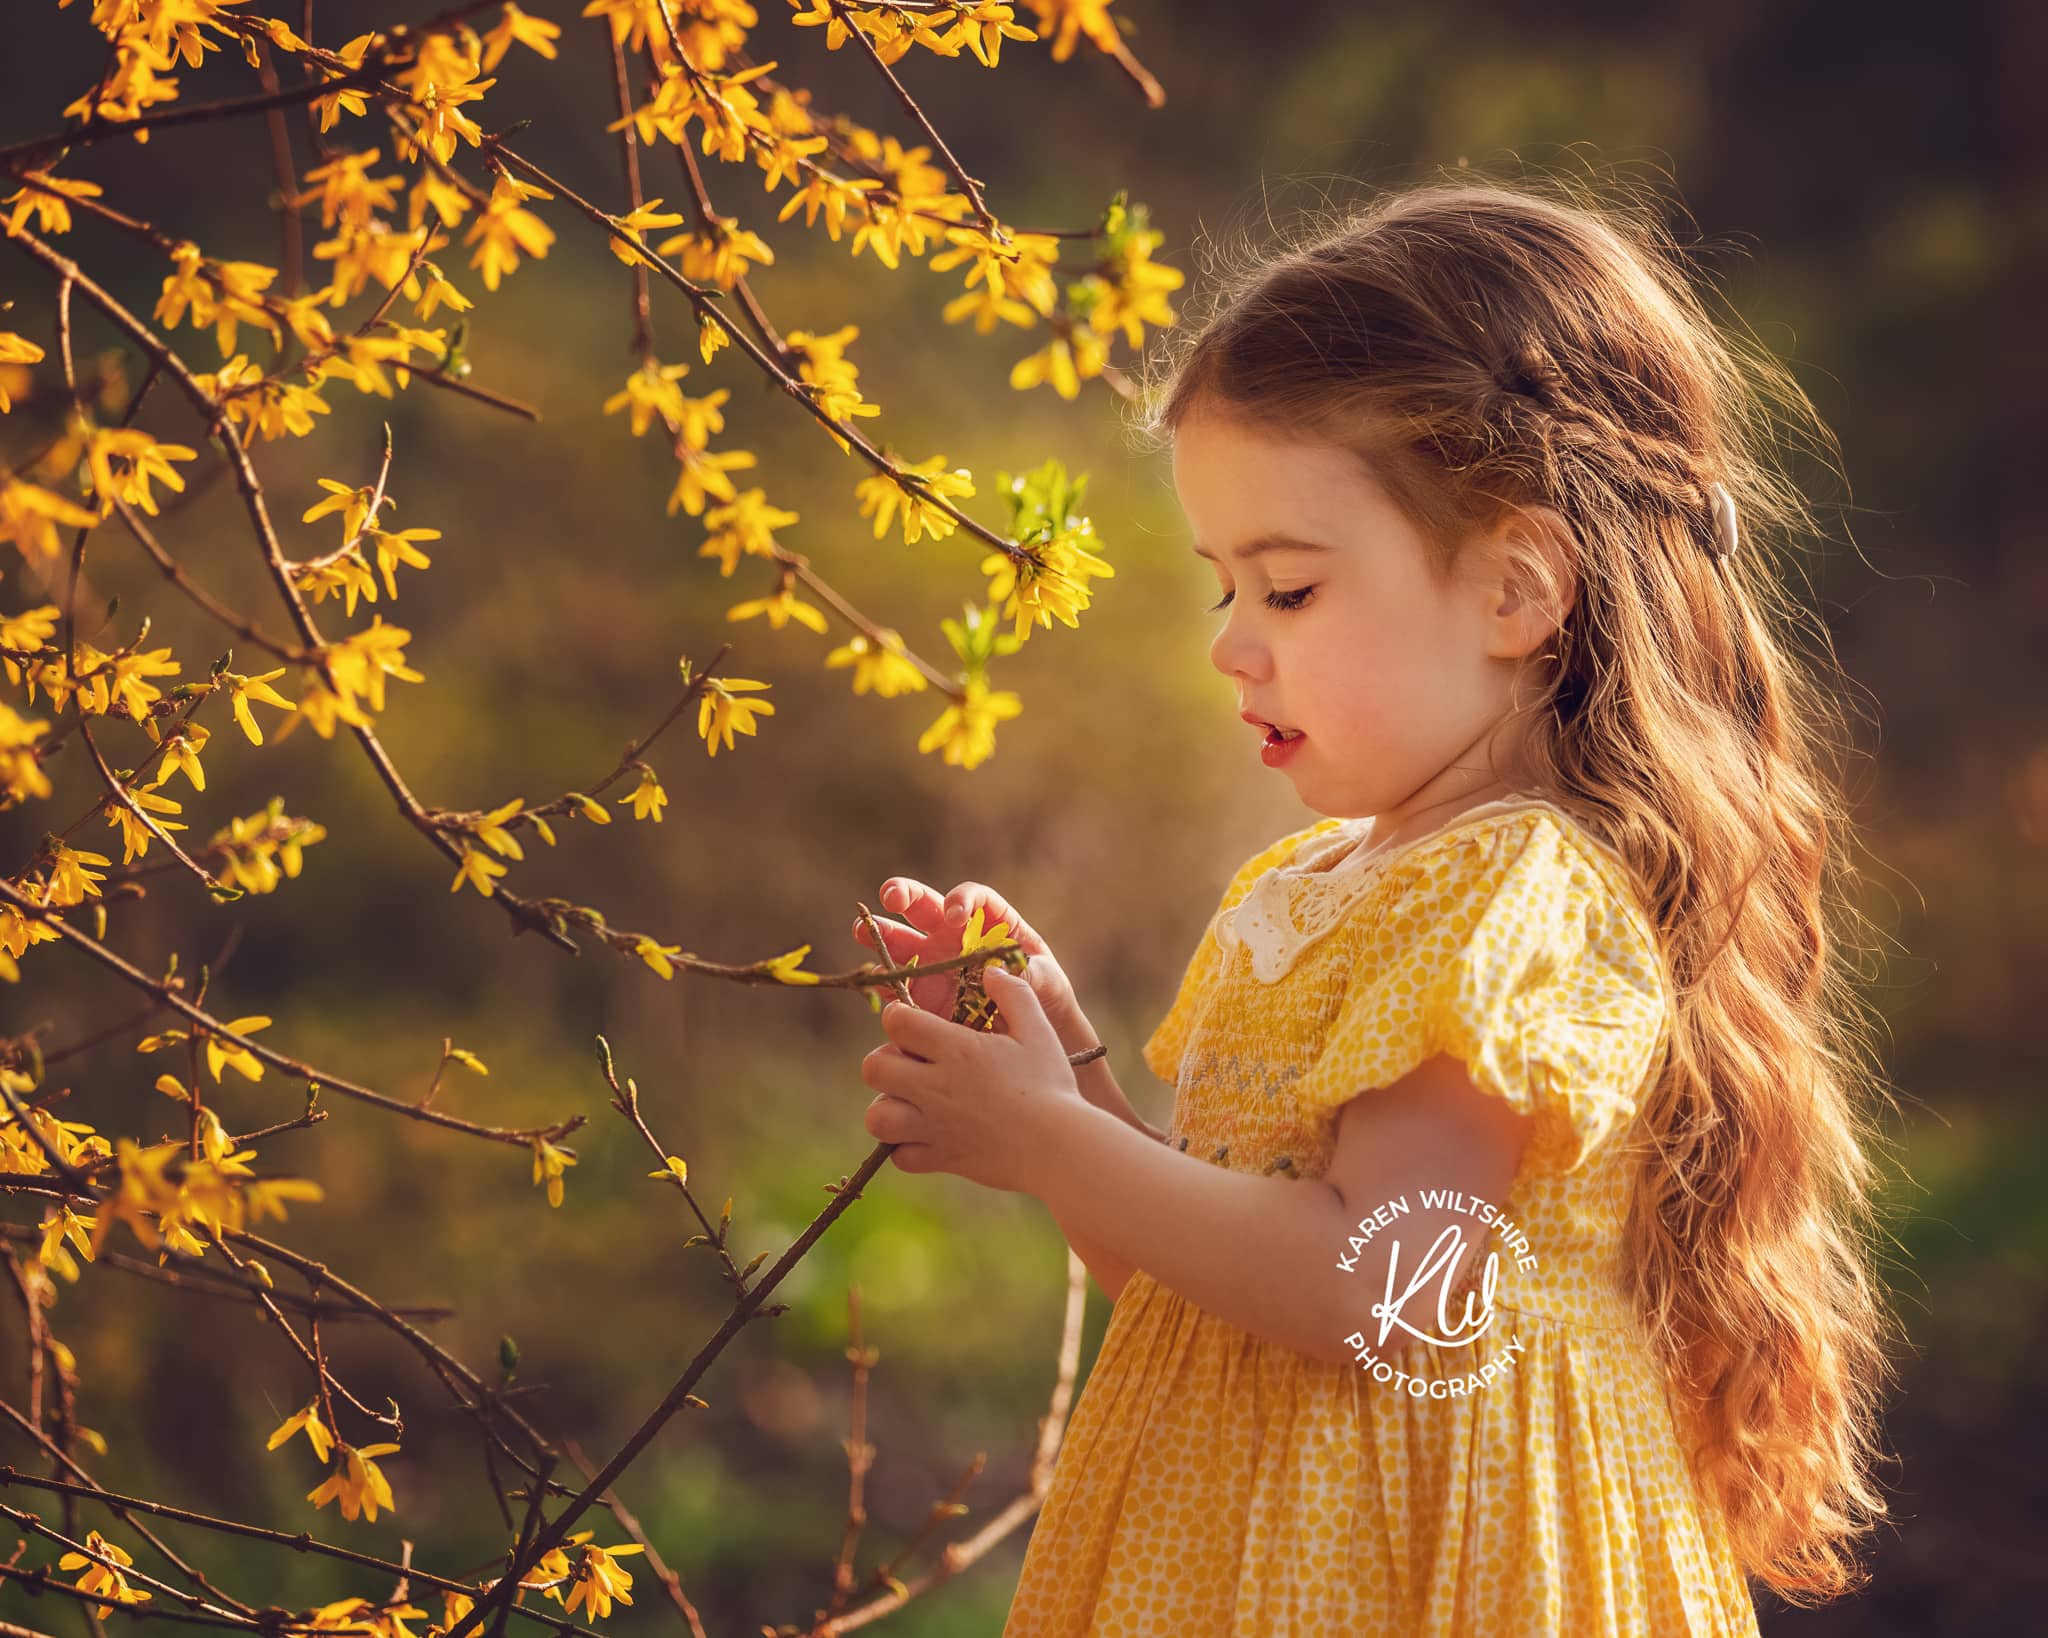 Child Photography Archives - Karen Wiltshire Photography